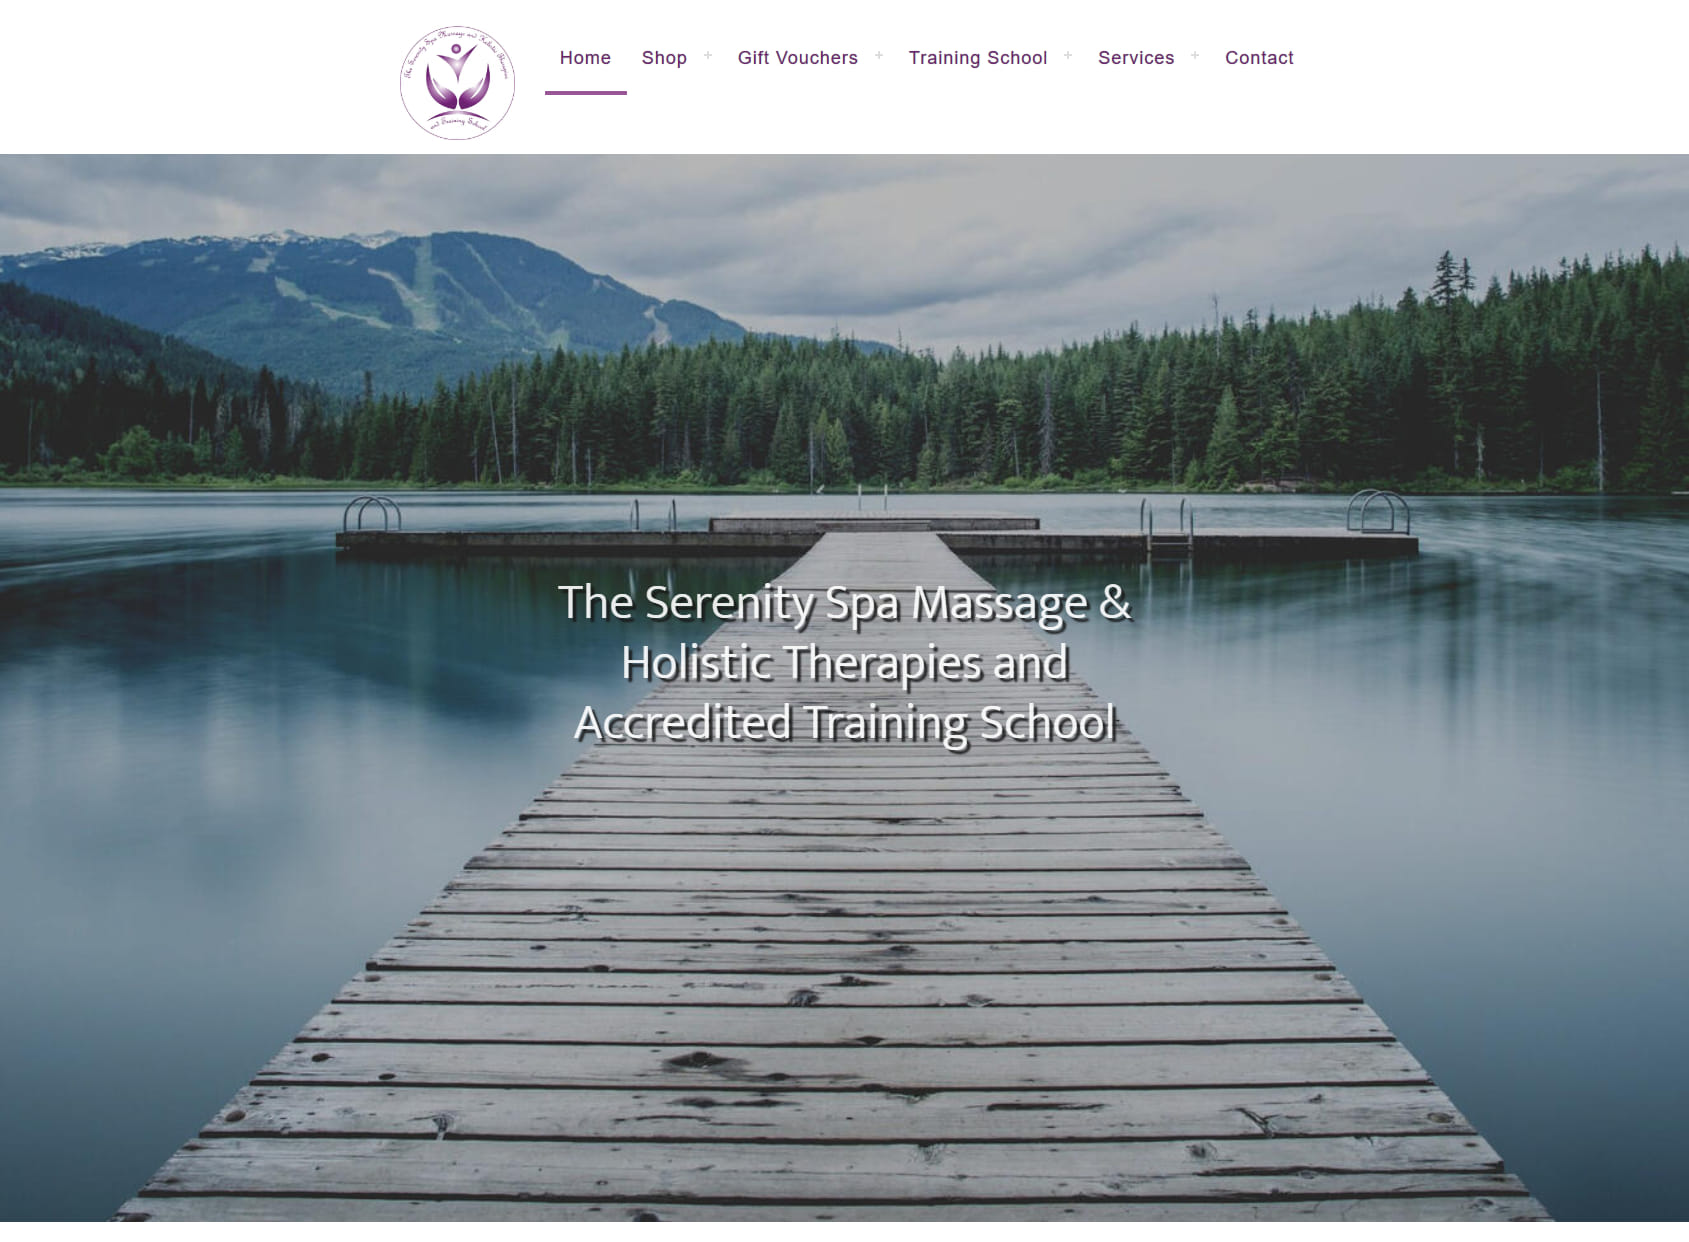 The Serenity Spa Massage & Holistic Therapies and Training School